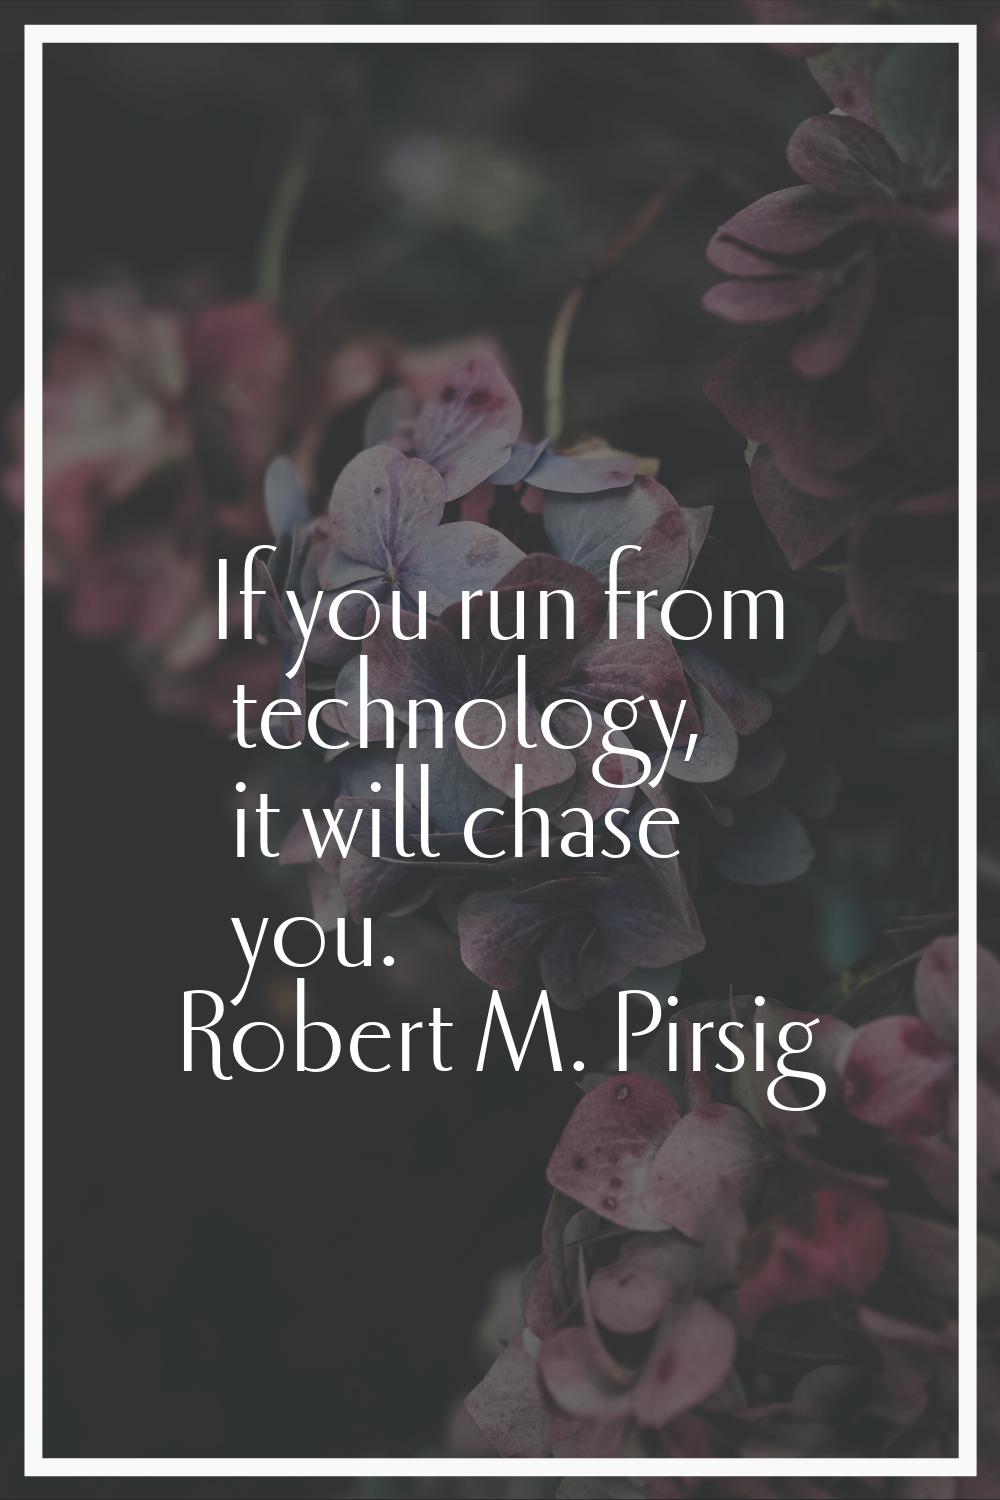 If you run from technology, it will chase you.